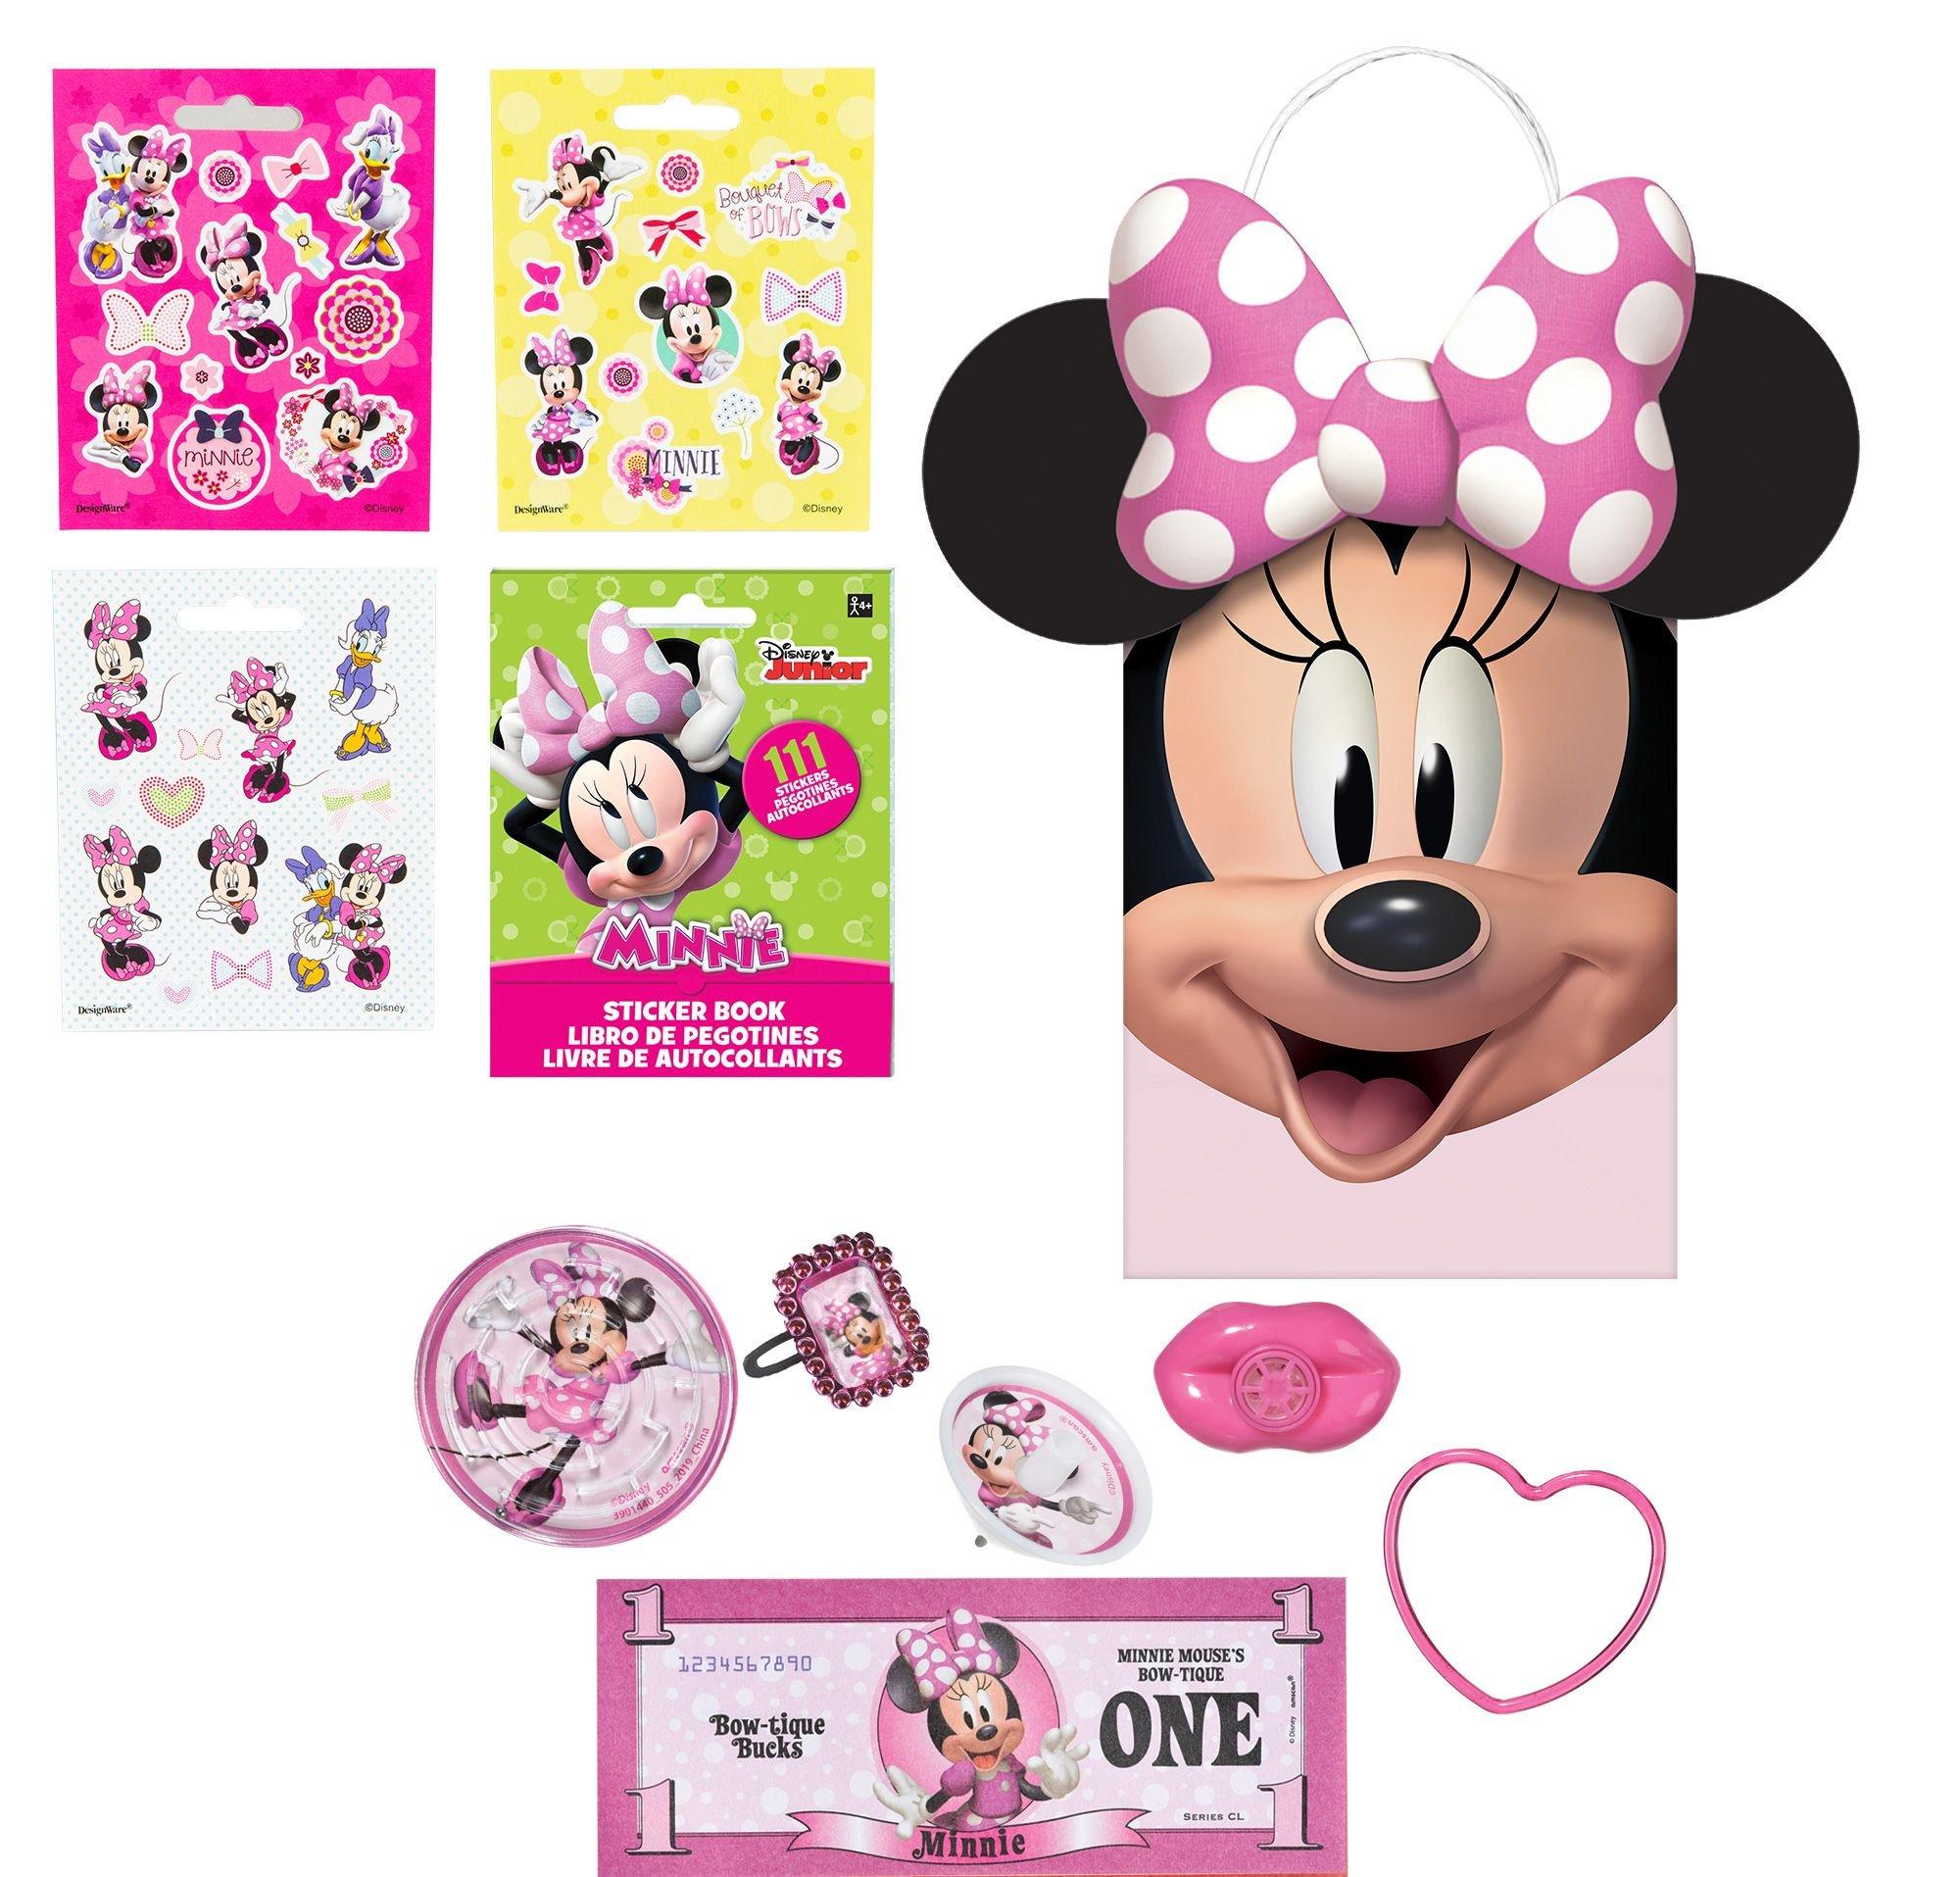 Disney Minnie Mouse Sticker Book with Over 200 Stickers